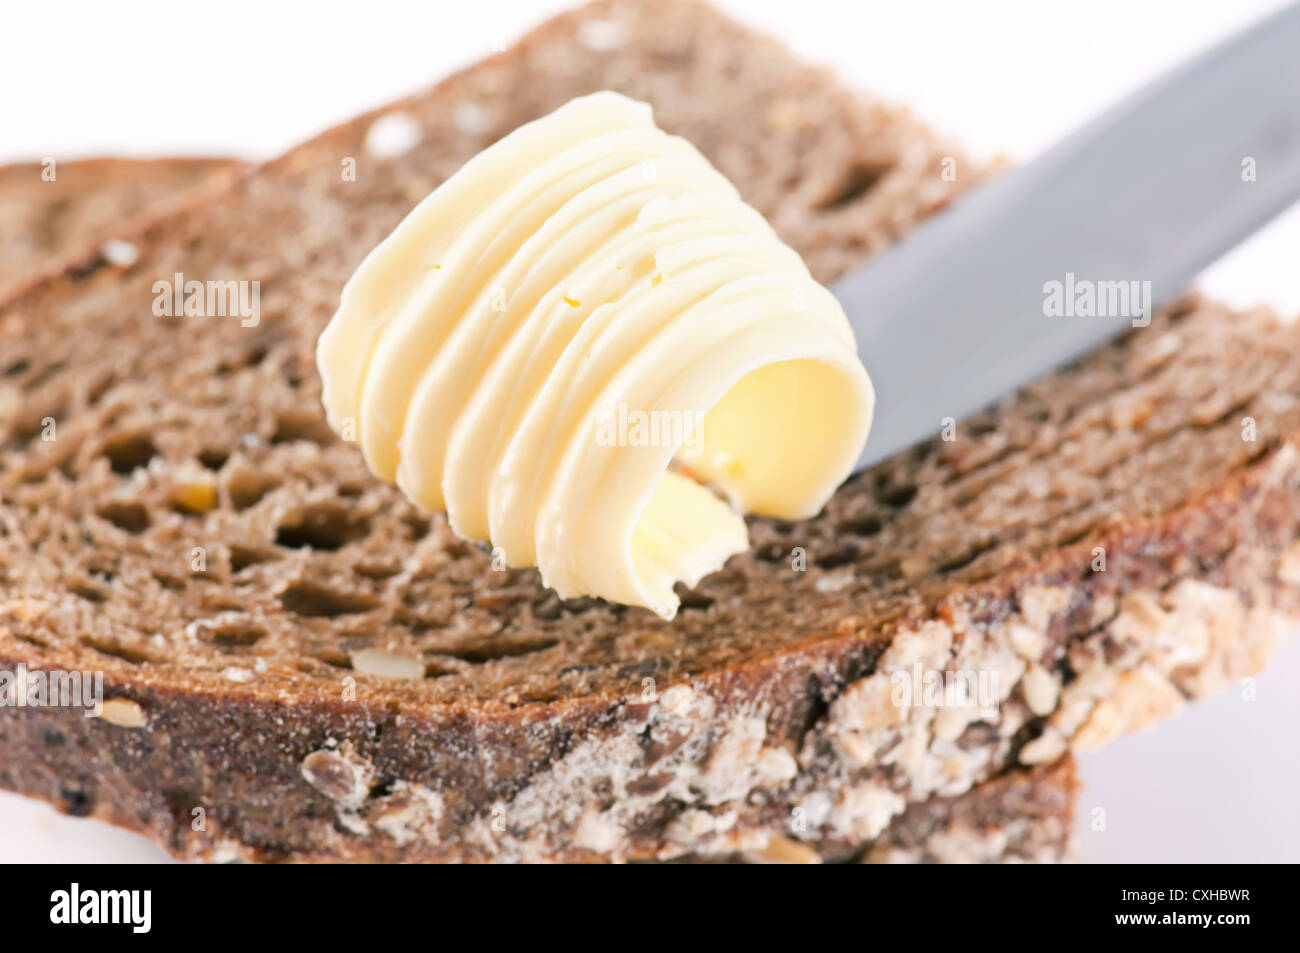 Piece of Bread with butter rolls Stock Photo